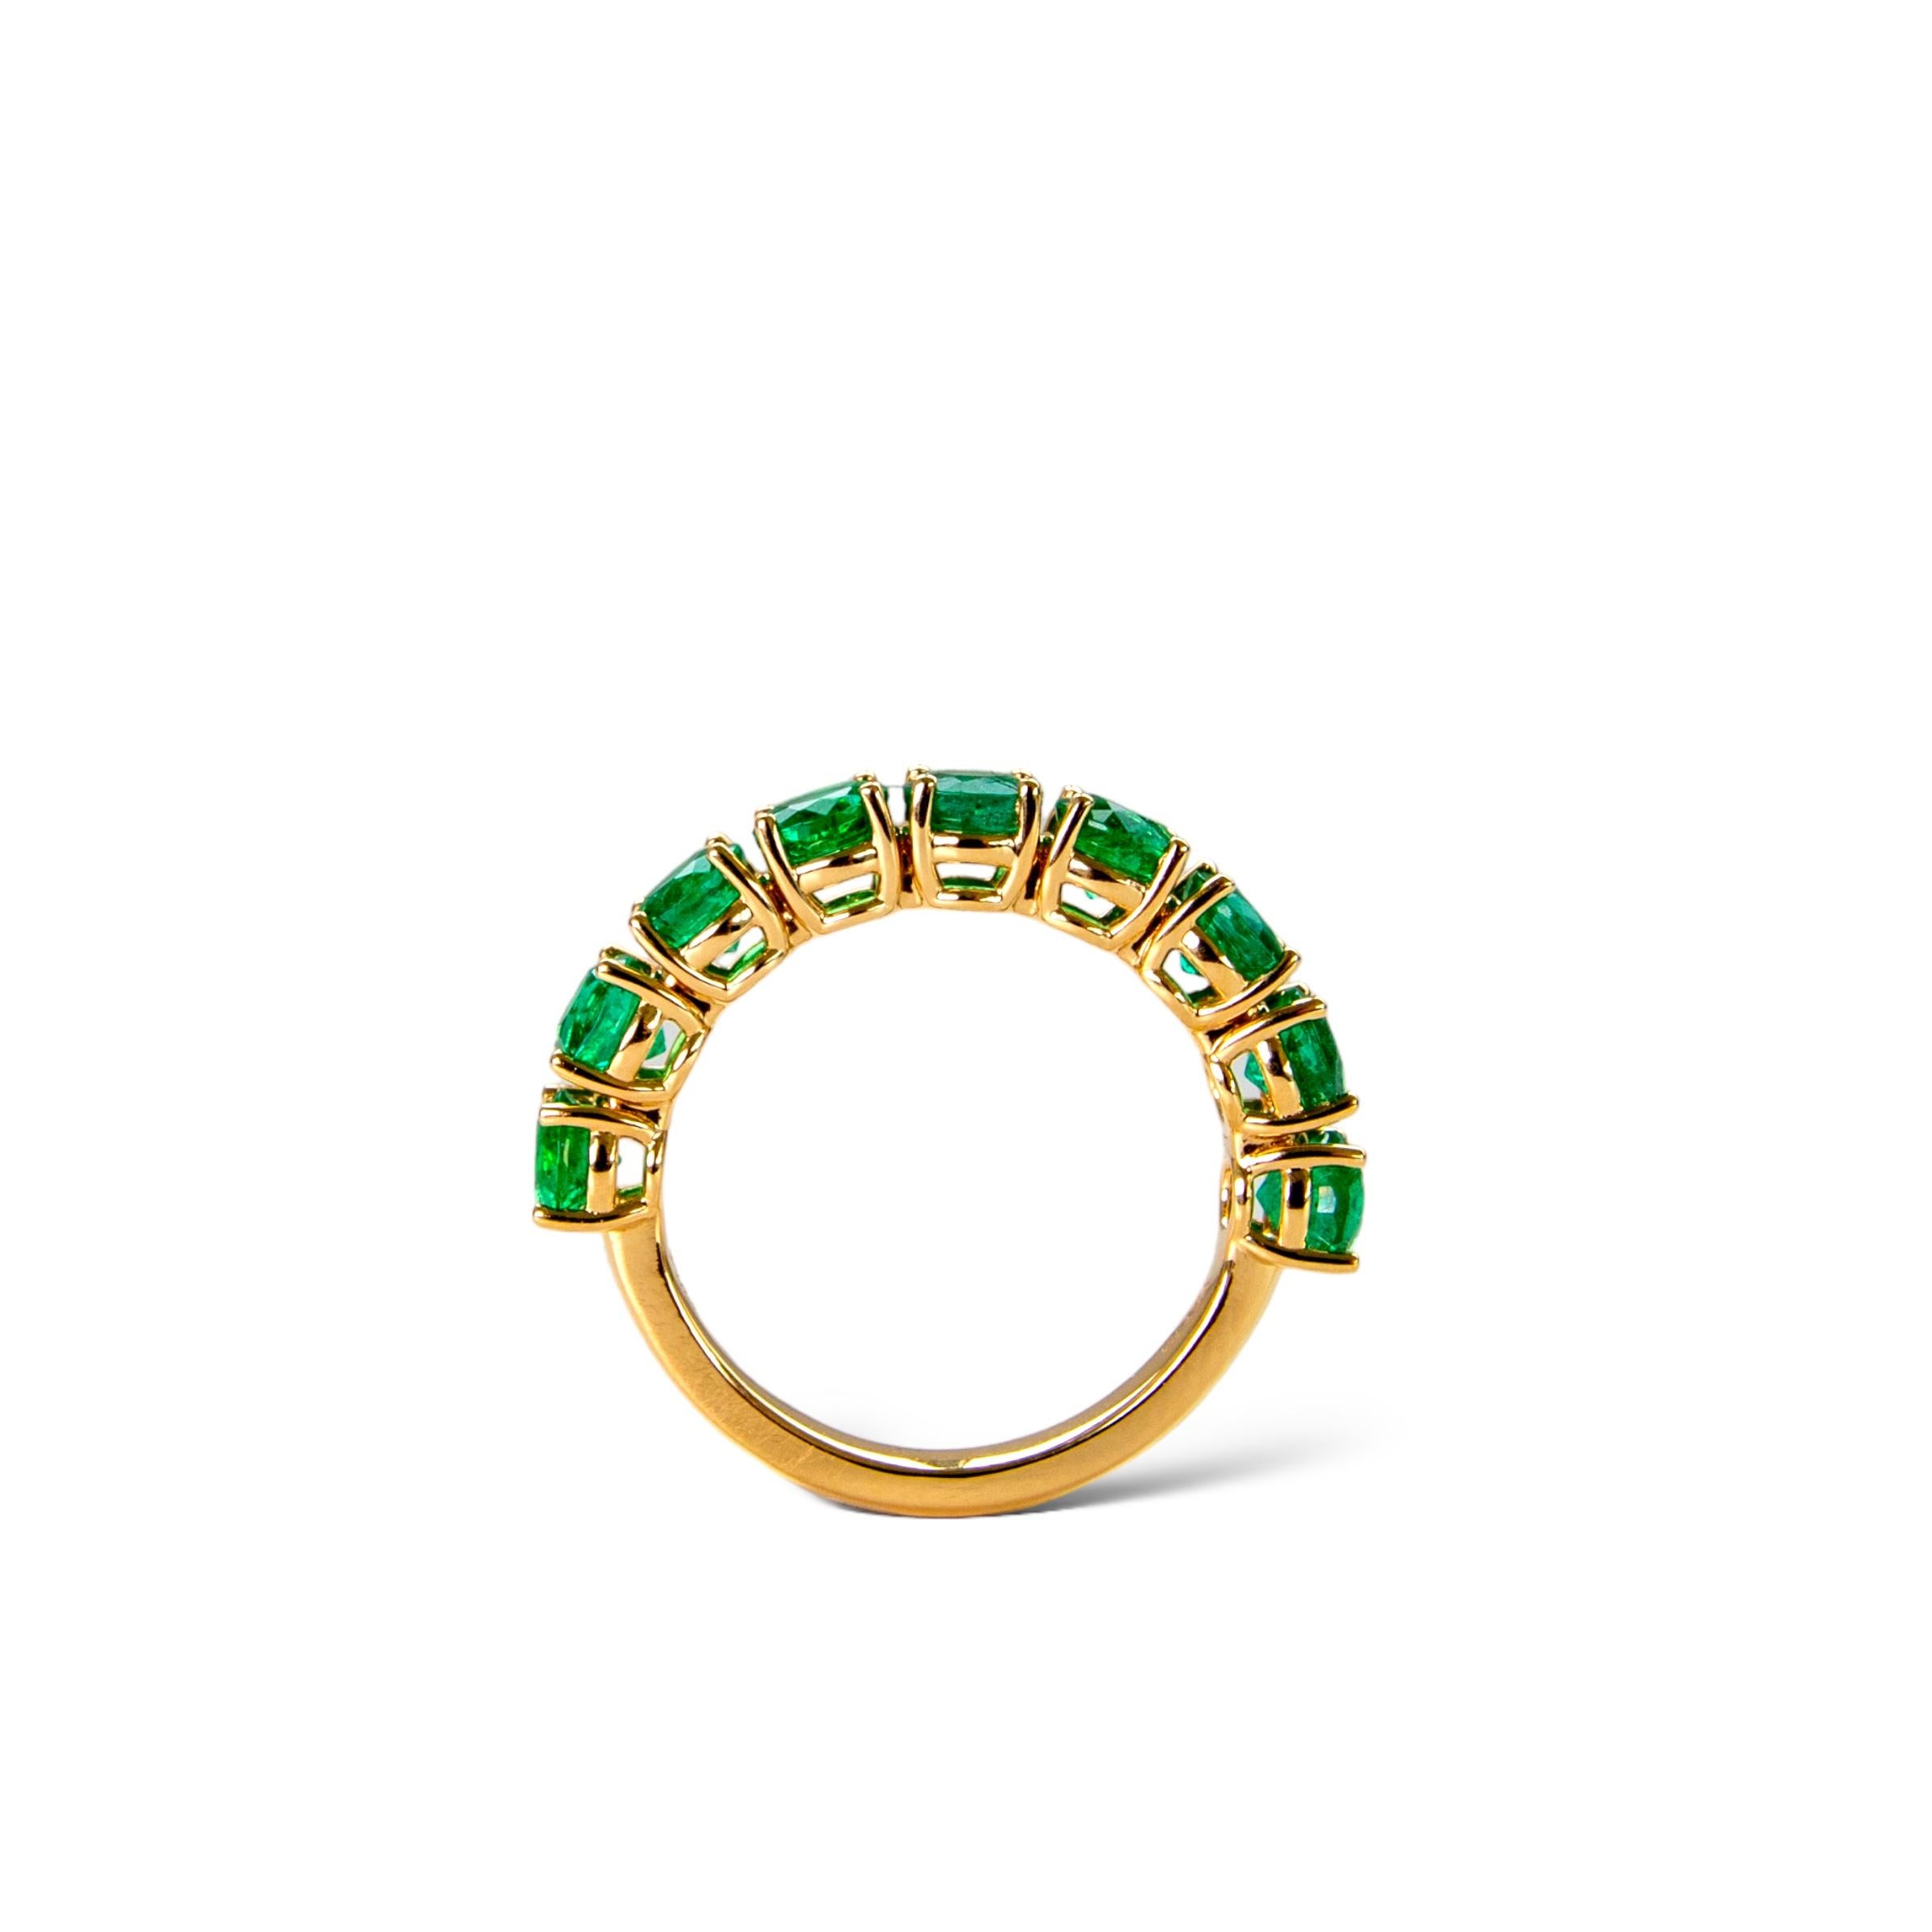 Beautiful Zambian green emerald eternity ring featuring 9 round natural emeralds set in a solid 18k yellow gold ring.

Emeralds are said to bring good fortune and good luck to the wearer, and to attract wealth. In addition, emeralds are believed to